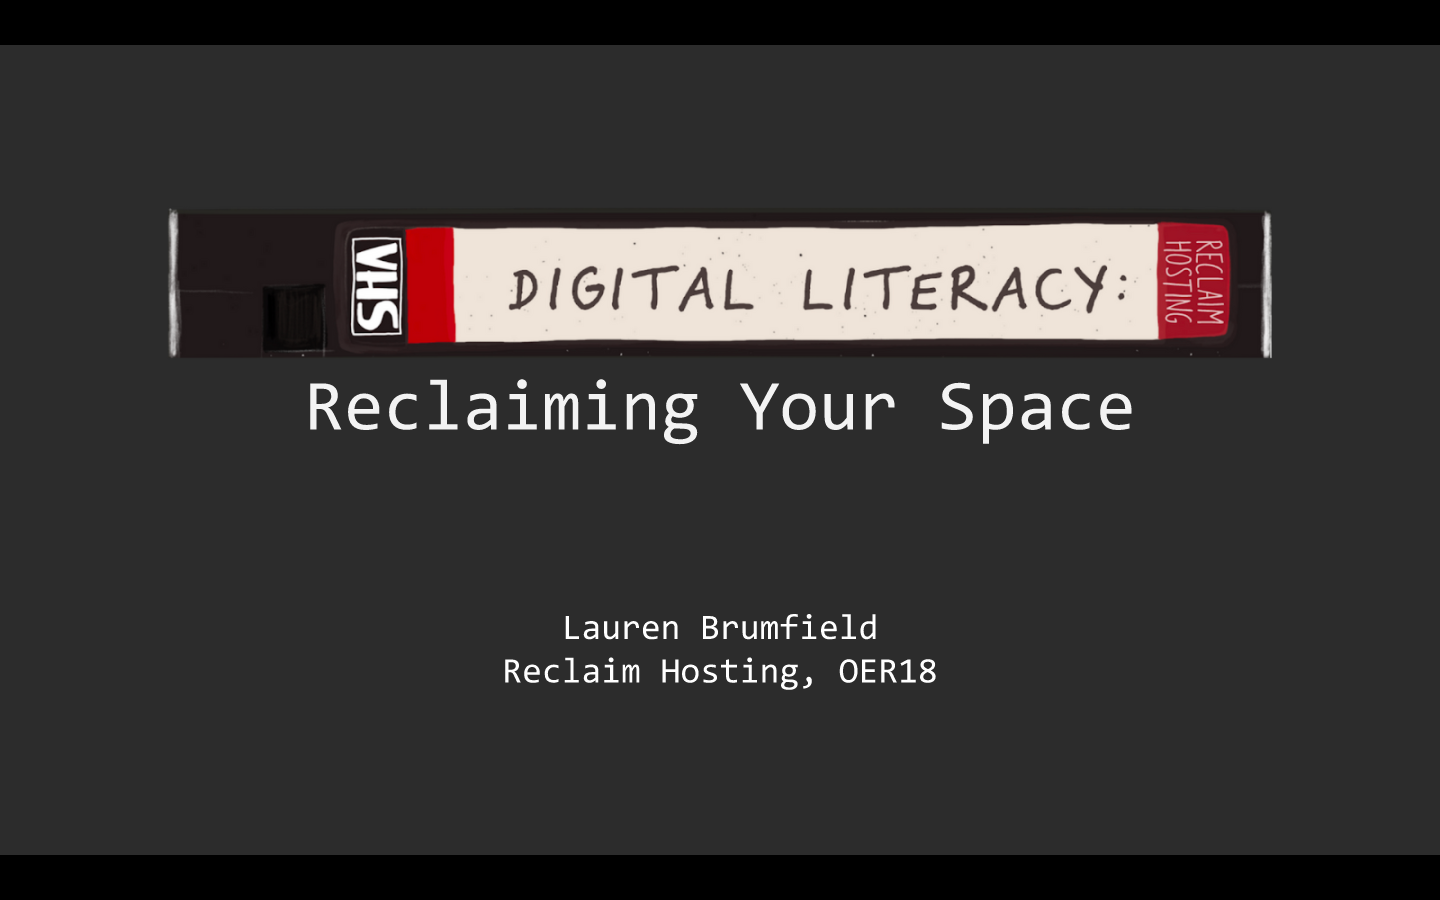 Digital Literacy: Reclaiming Your Space